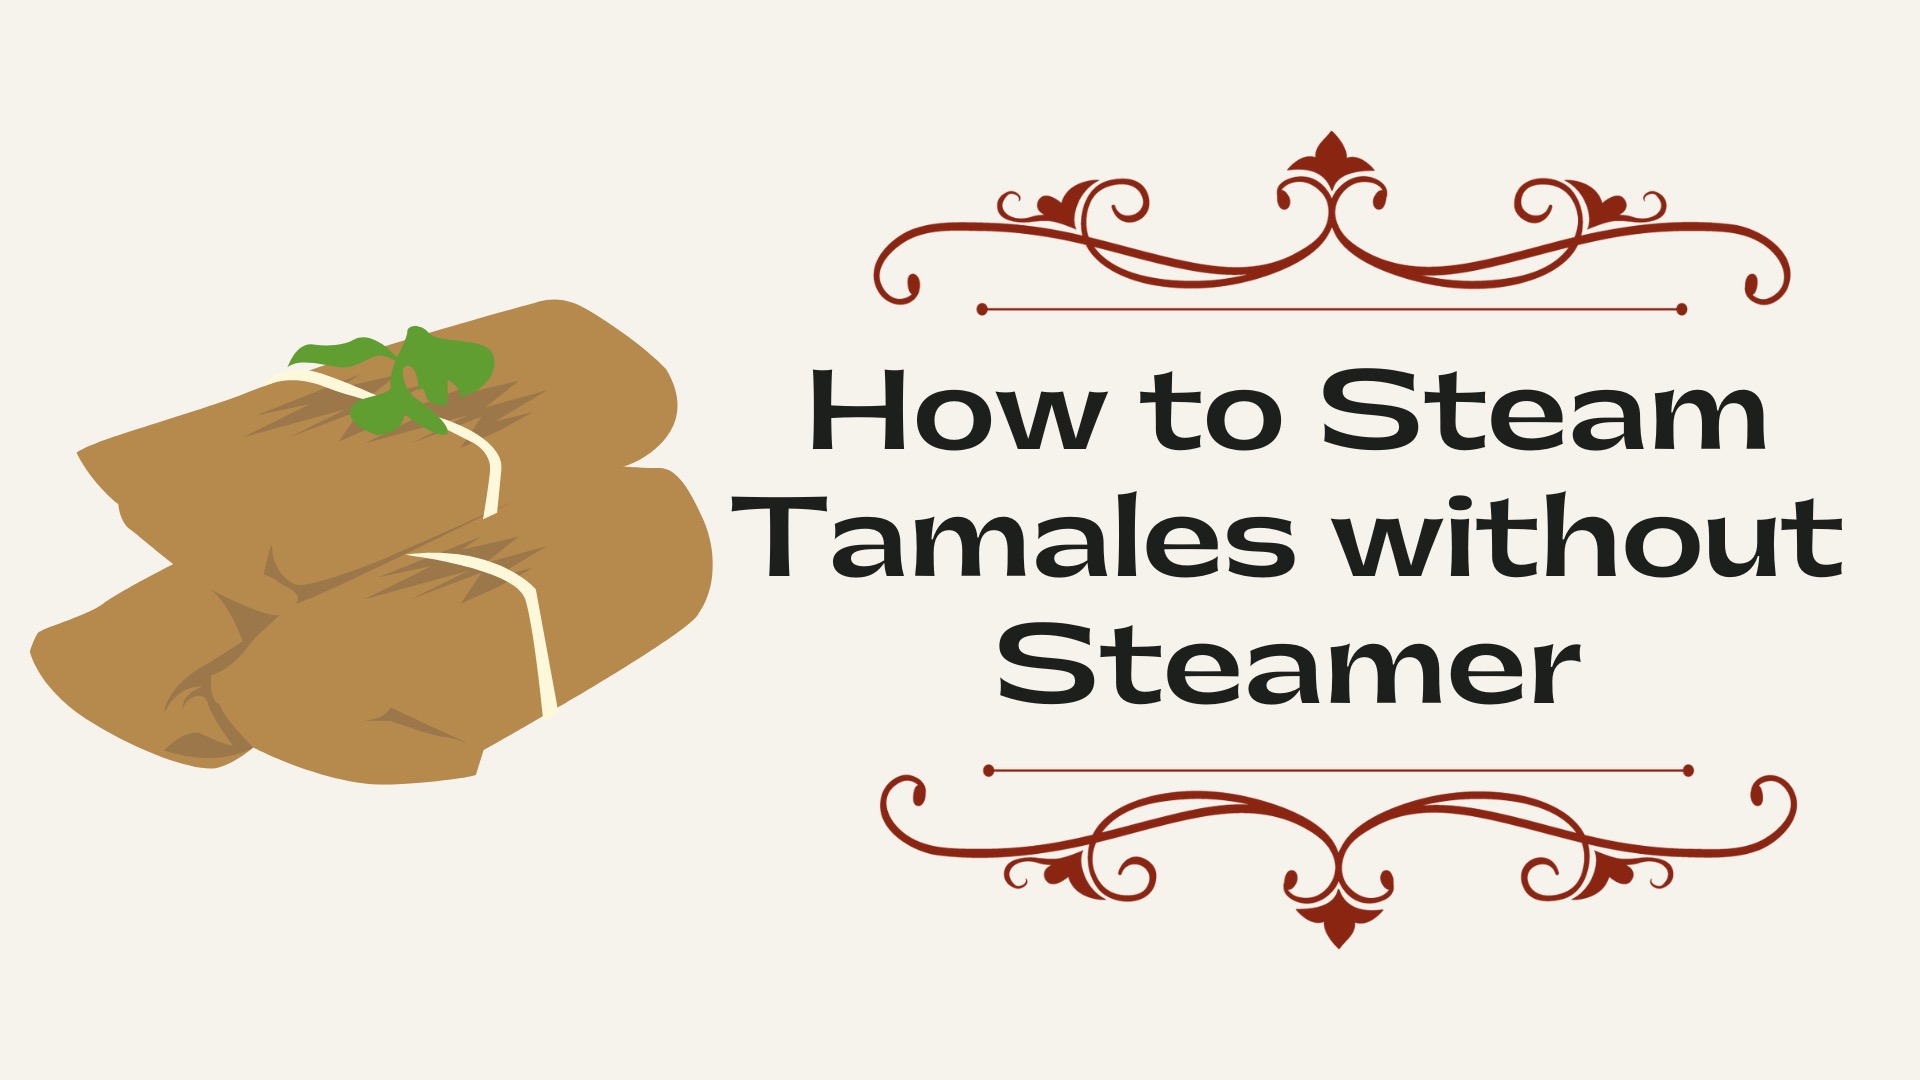 https://www.kitchenthinker.com/wp-content/uploads/2020/03/How-to-Steam-Tamales-without-Steamer.jpeg